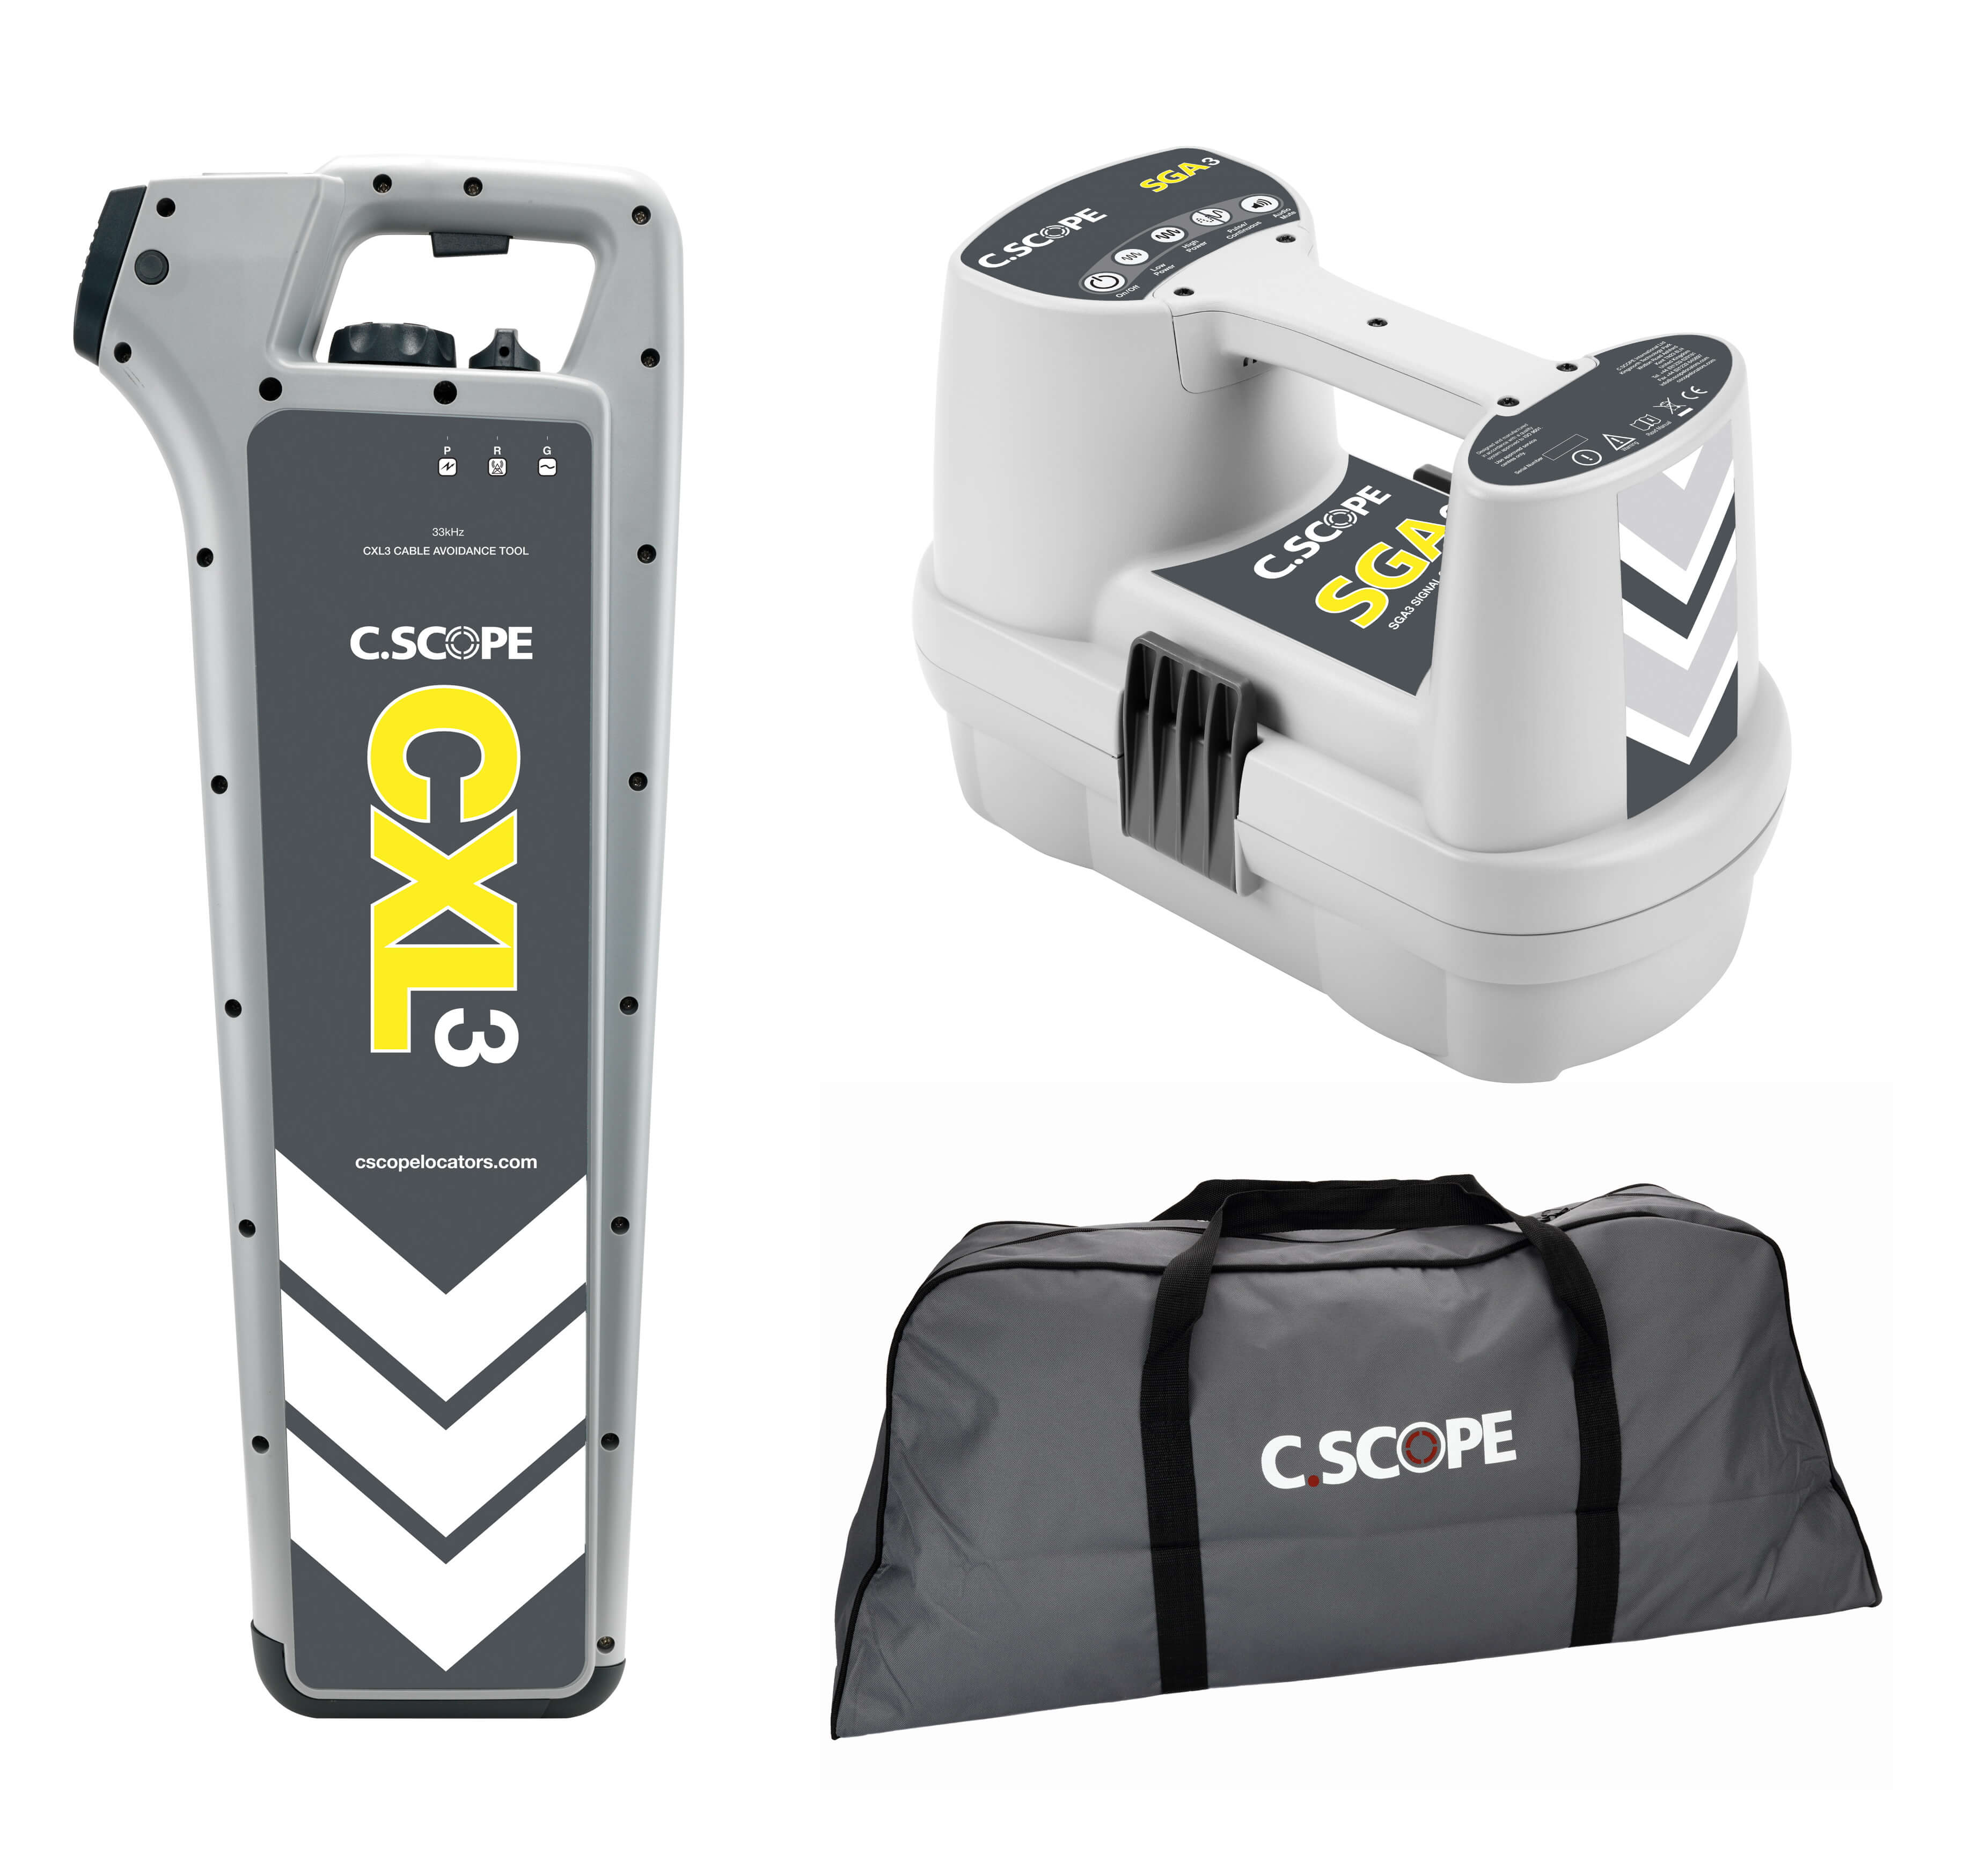 C.Scope CXL3 Top Value Cable Detector Kit with SGA3 and Soft bag - Cable Detector Calibration & Sales